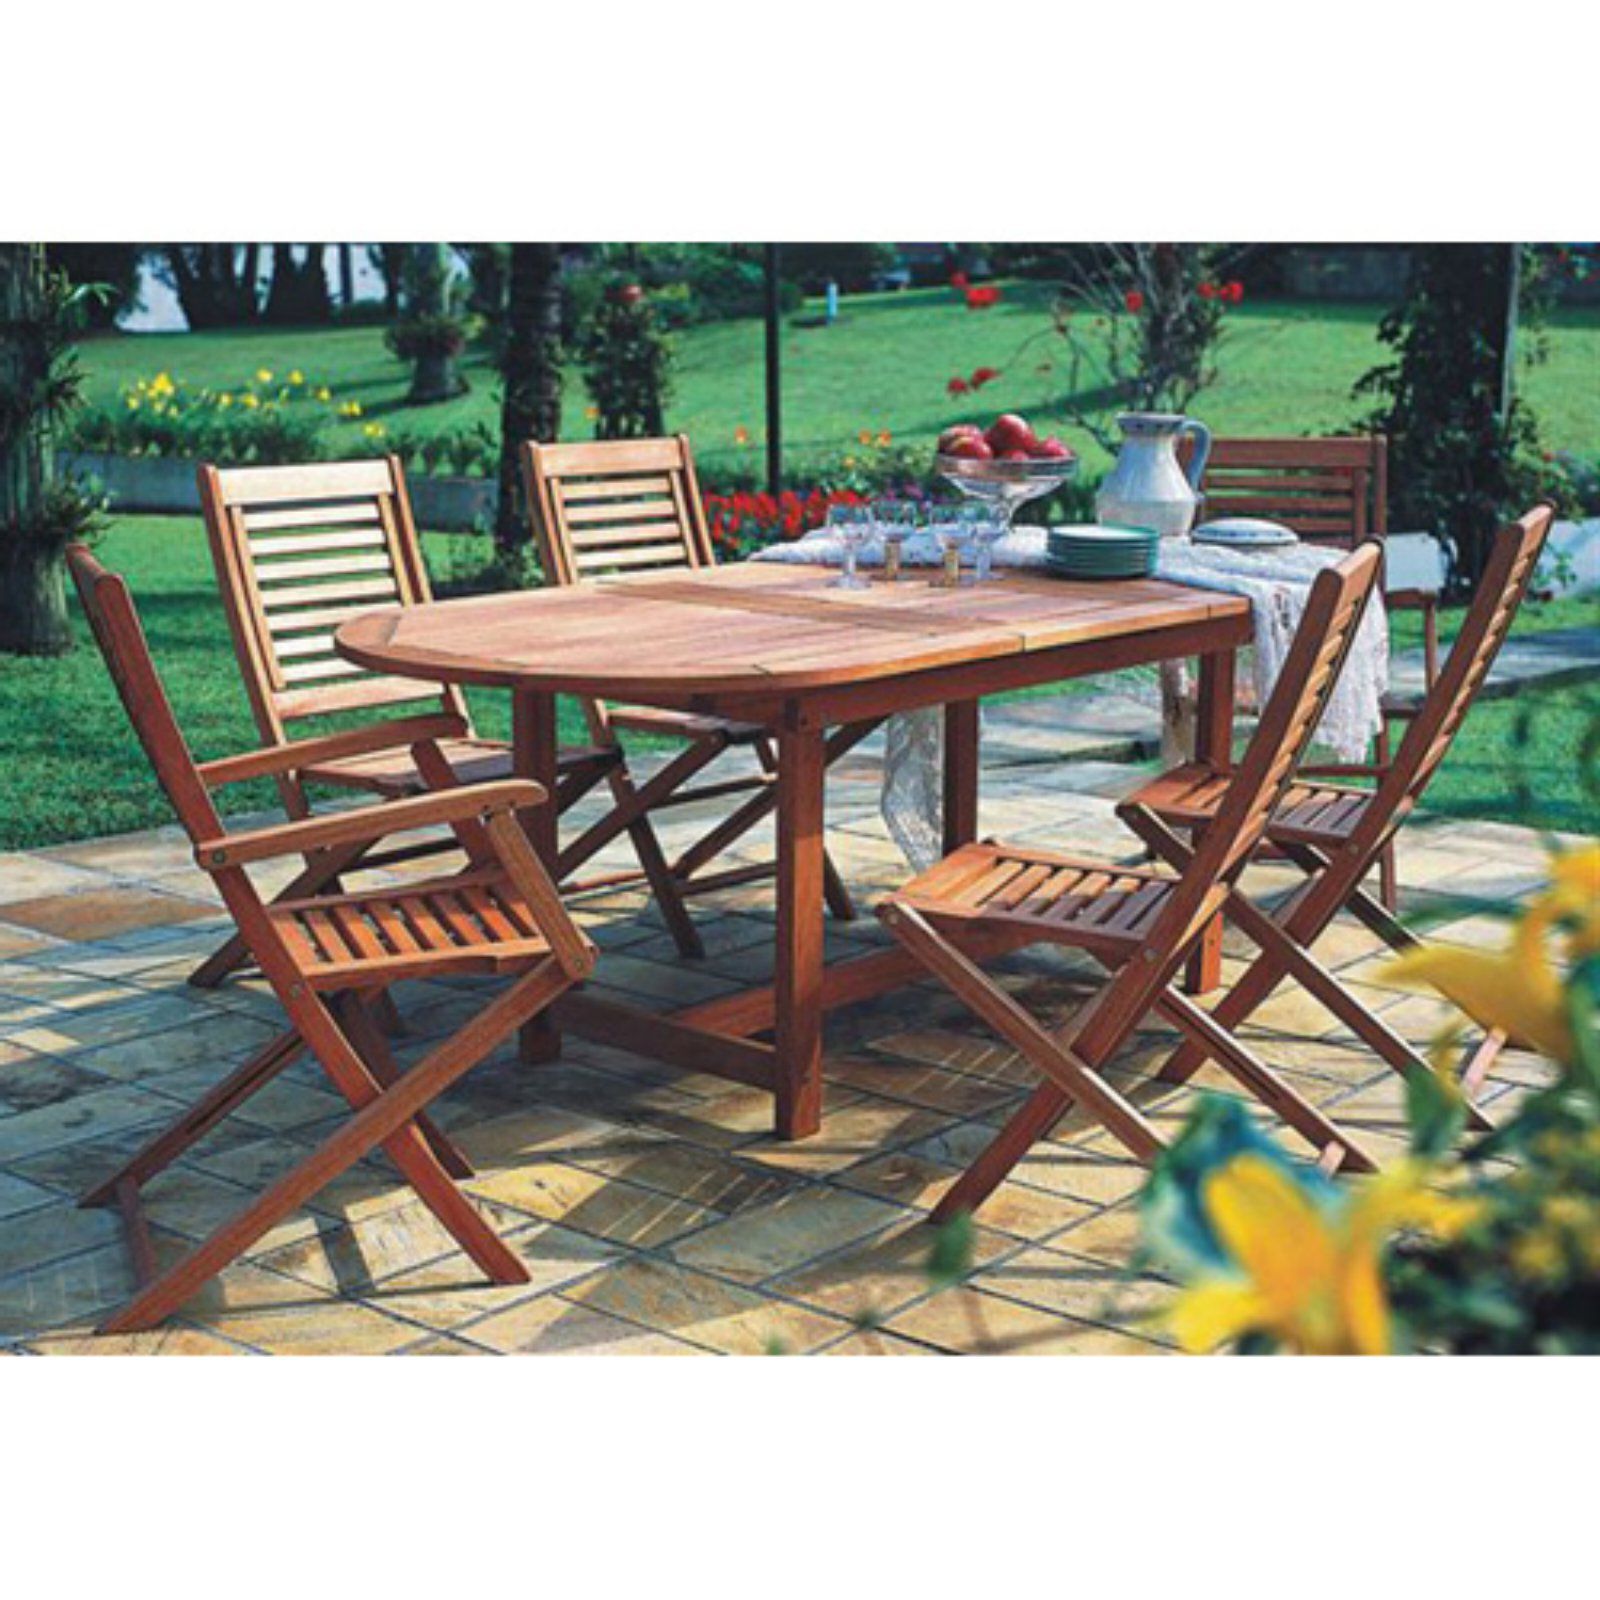 Amazonia Milano Eucalyptus Oval Extendable 7 Piece Patio Dining Set For Popular Oval 7 Piece Outdoor Patio Dining Sets (View 5 of 15)